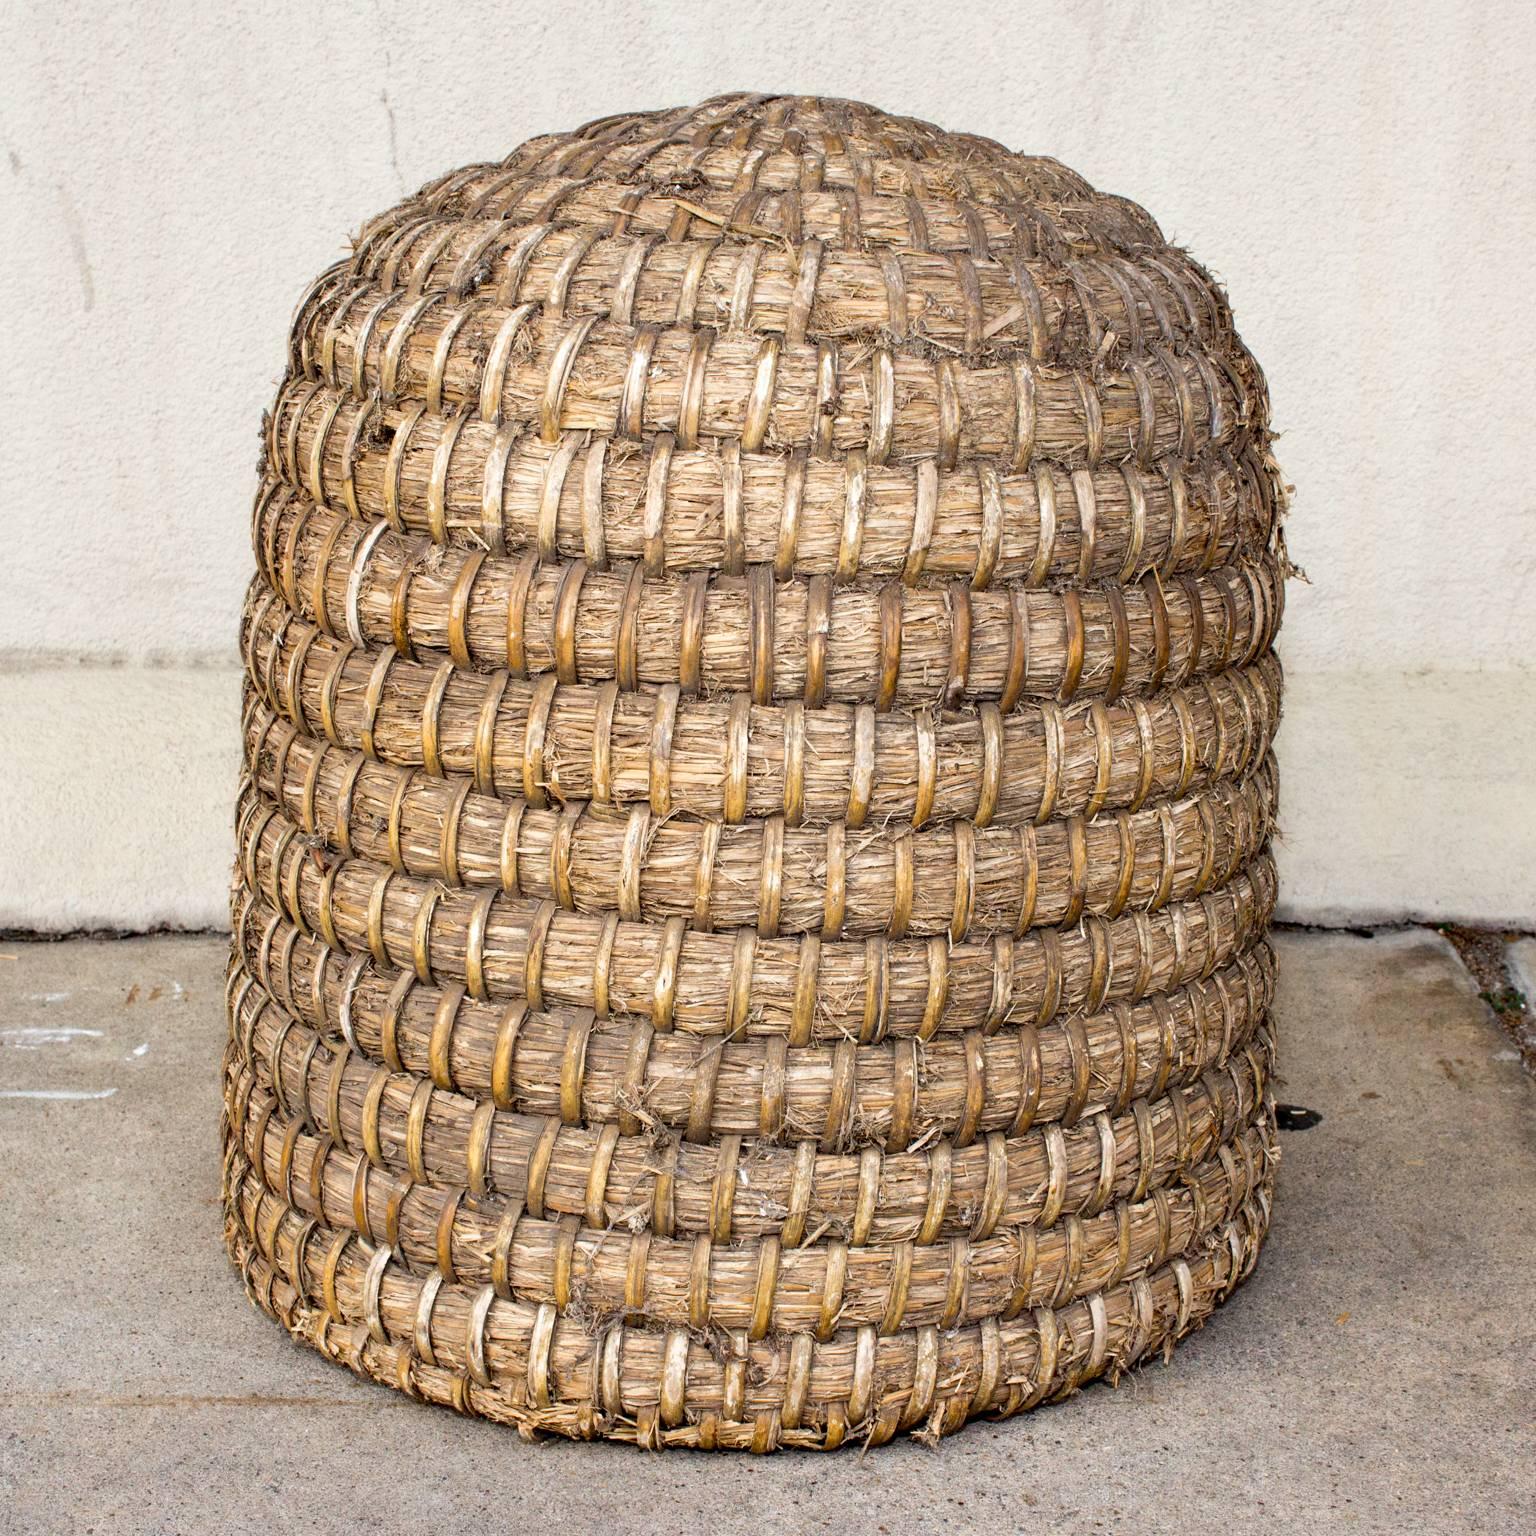 For centuries, beekeepers have used “skeps,” carefully designed domed baskets, to house their hives. Bees need a clean, dry place to make a home and these were common sights in Medieval Europe. Northern European beekeepers migrated from logs to